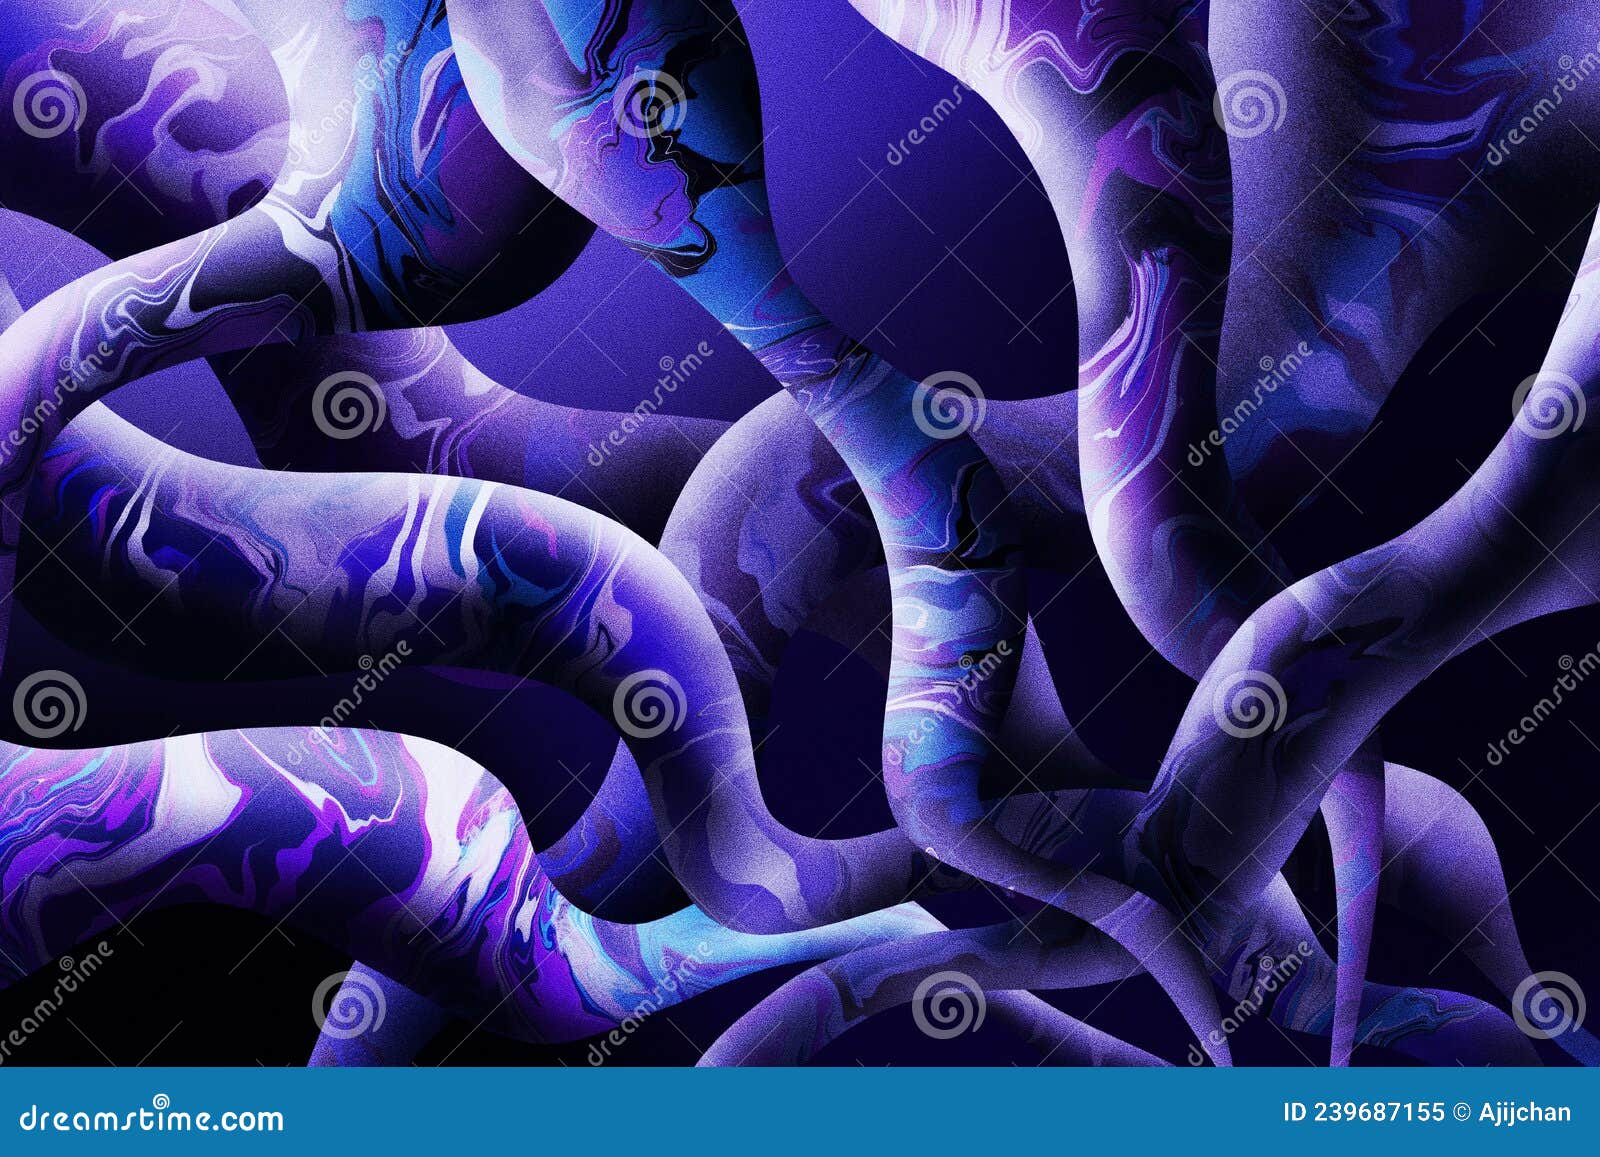 colourful wavy spiralling patterns background